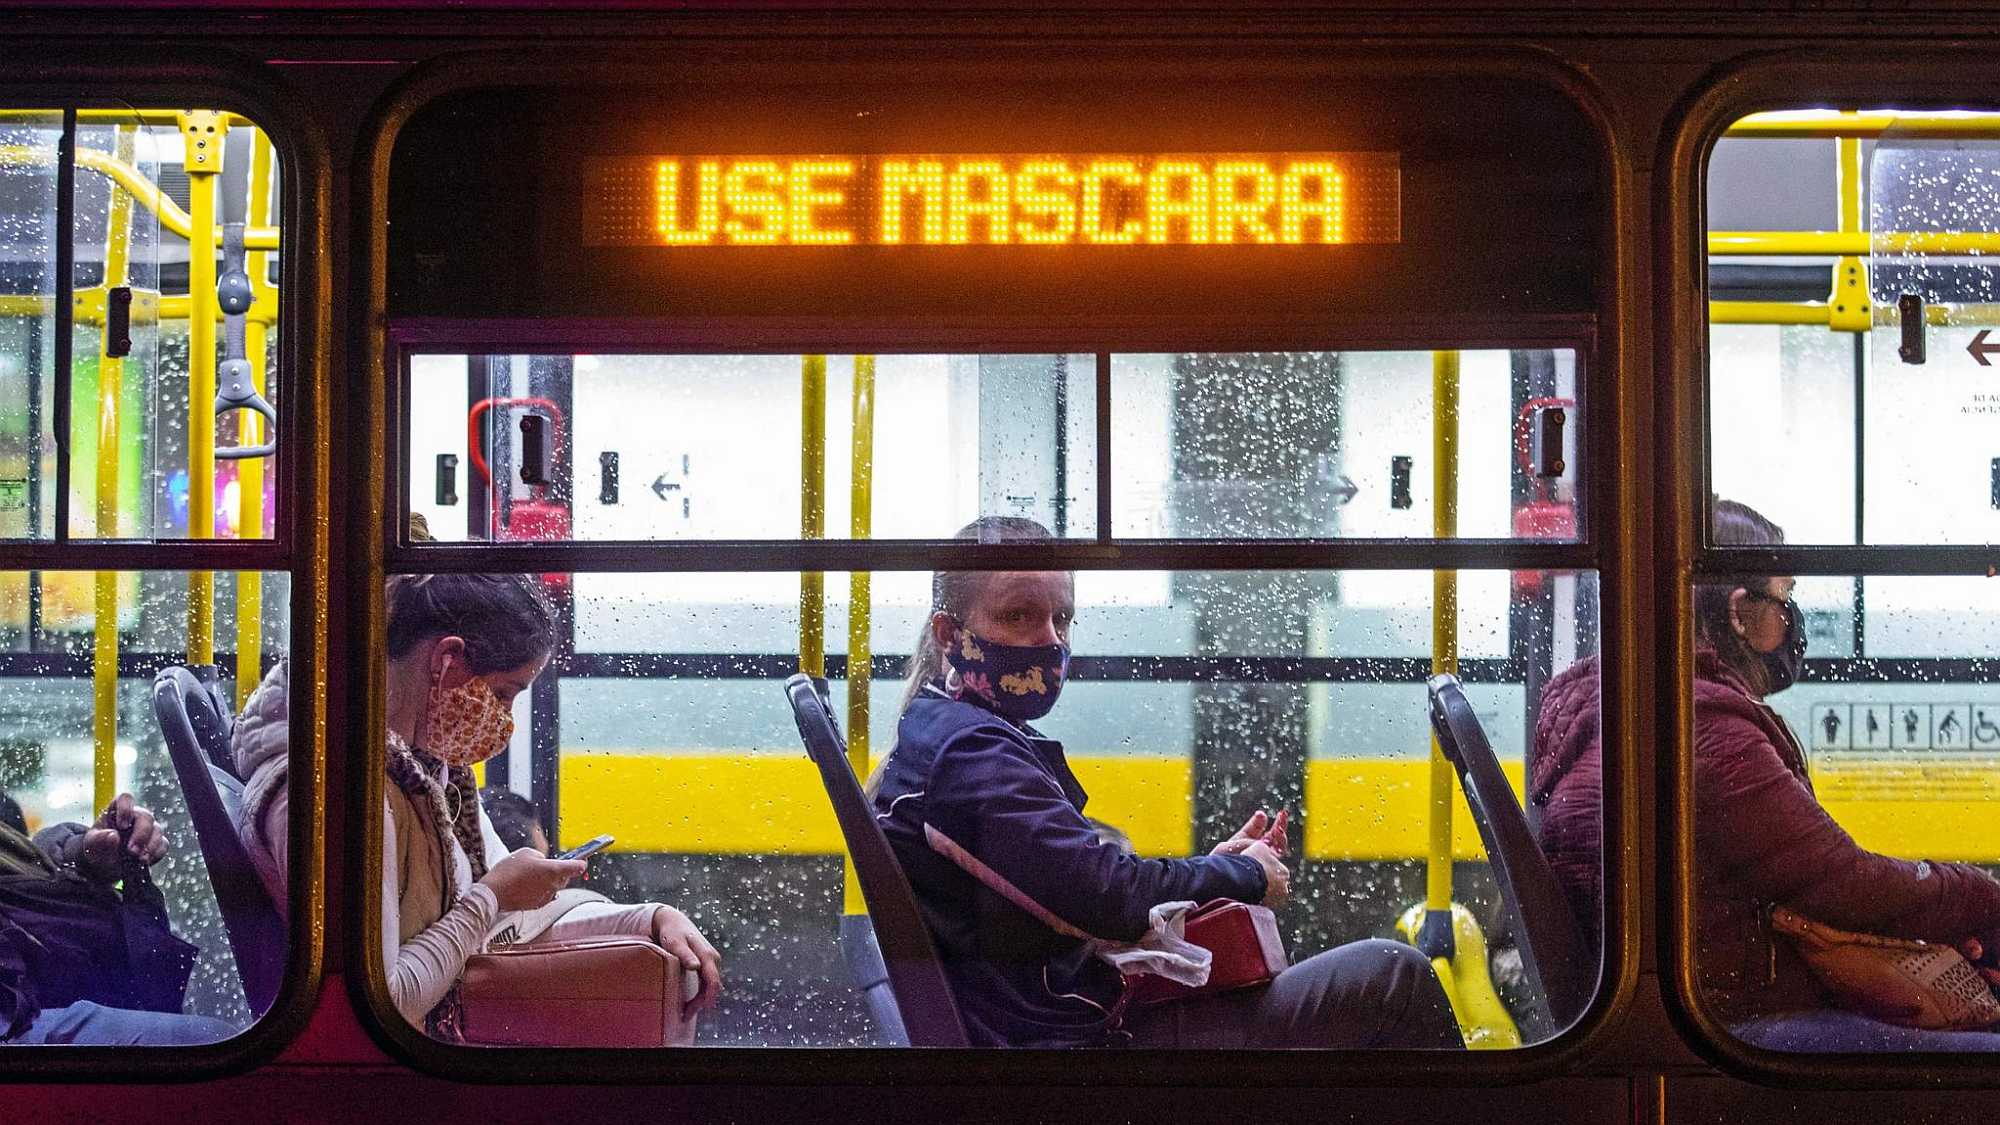 Sign in Curitiba, Brazil, bus says: "Wear a mask."